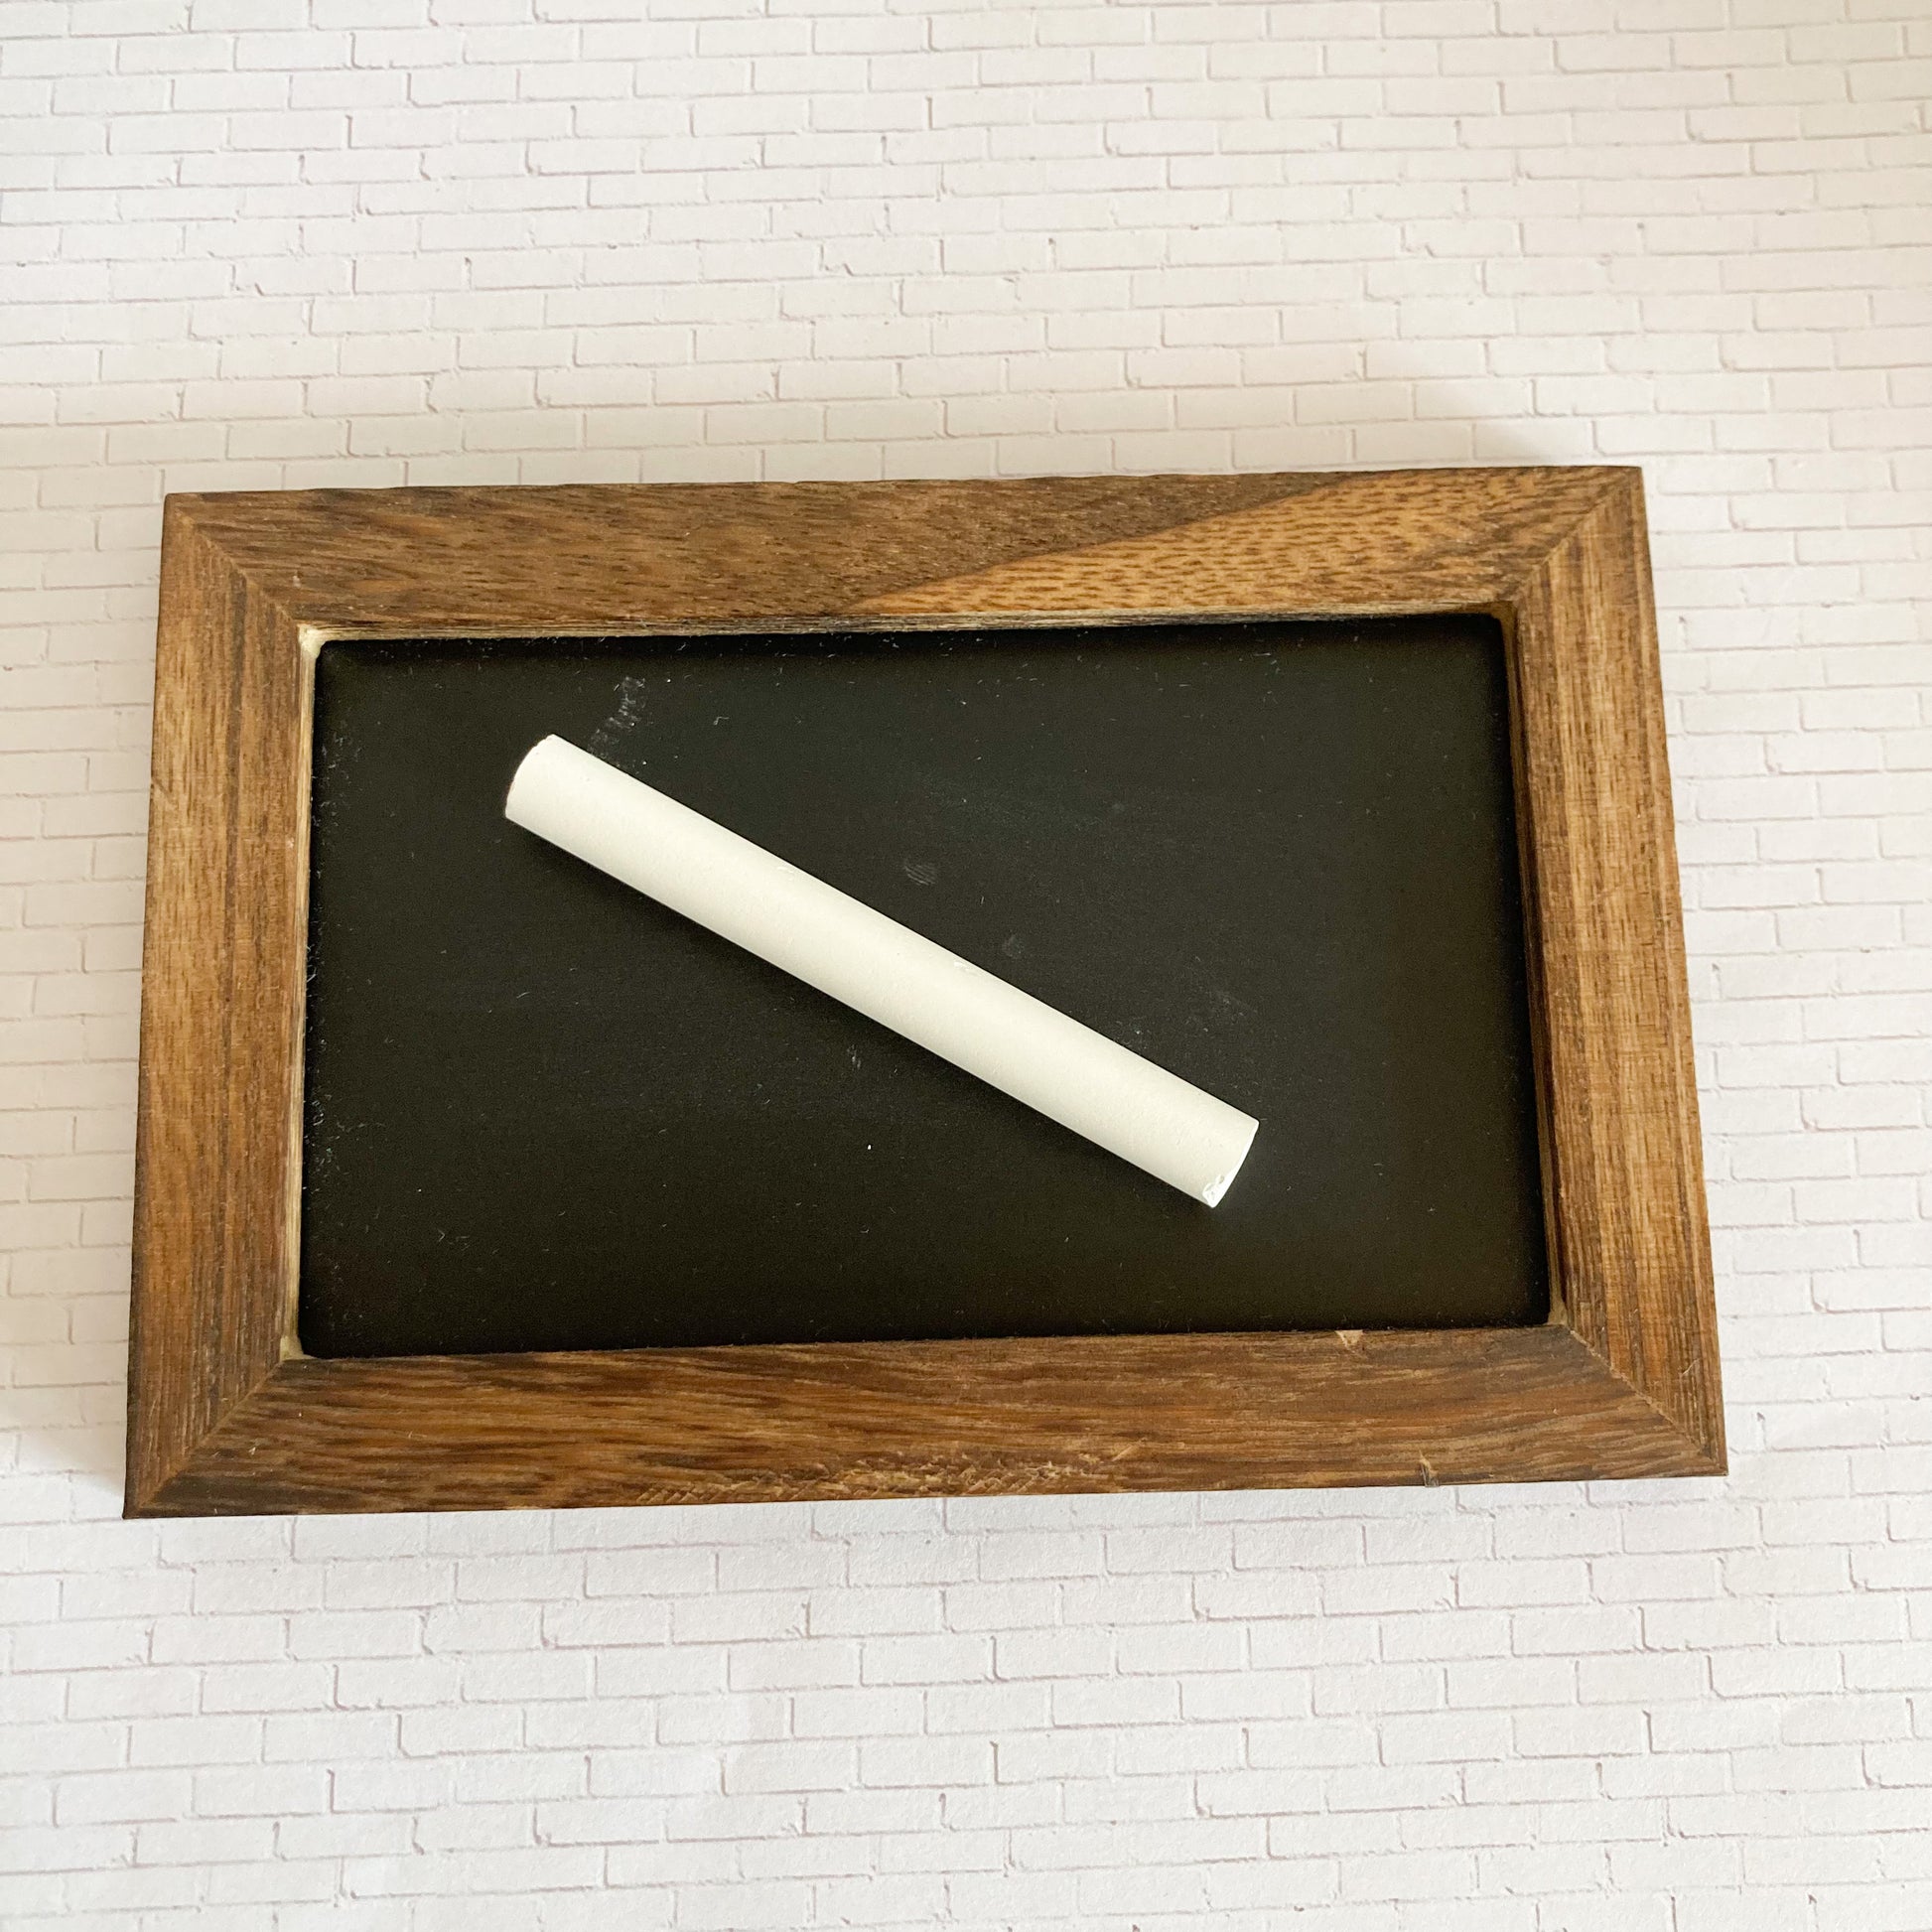 Mini chalkboard 4 inches by 6 inches with wood frame stained brown real chalkboard slate with white chalk